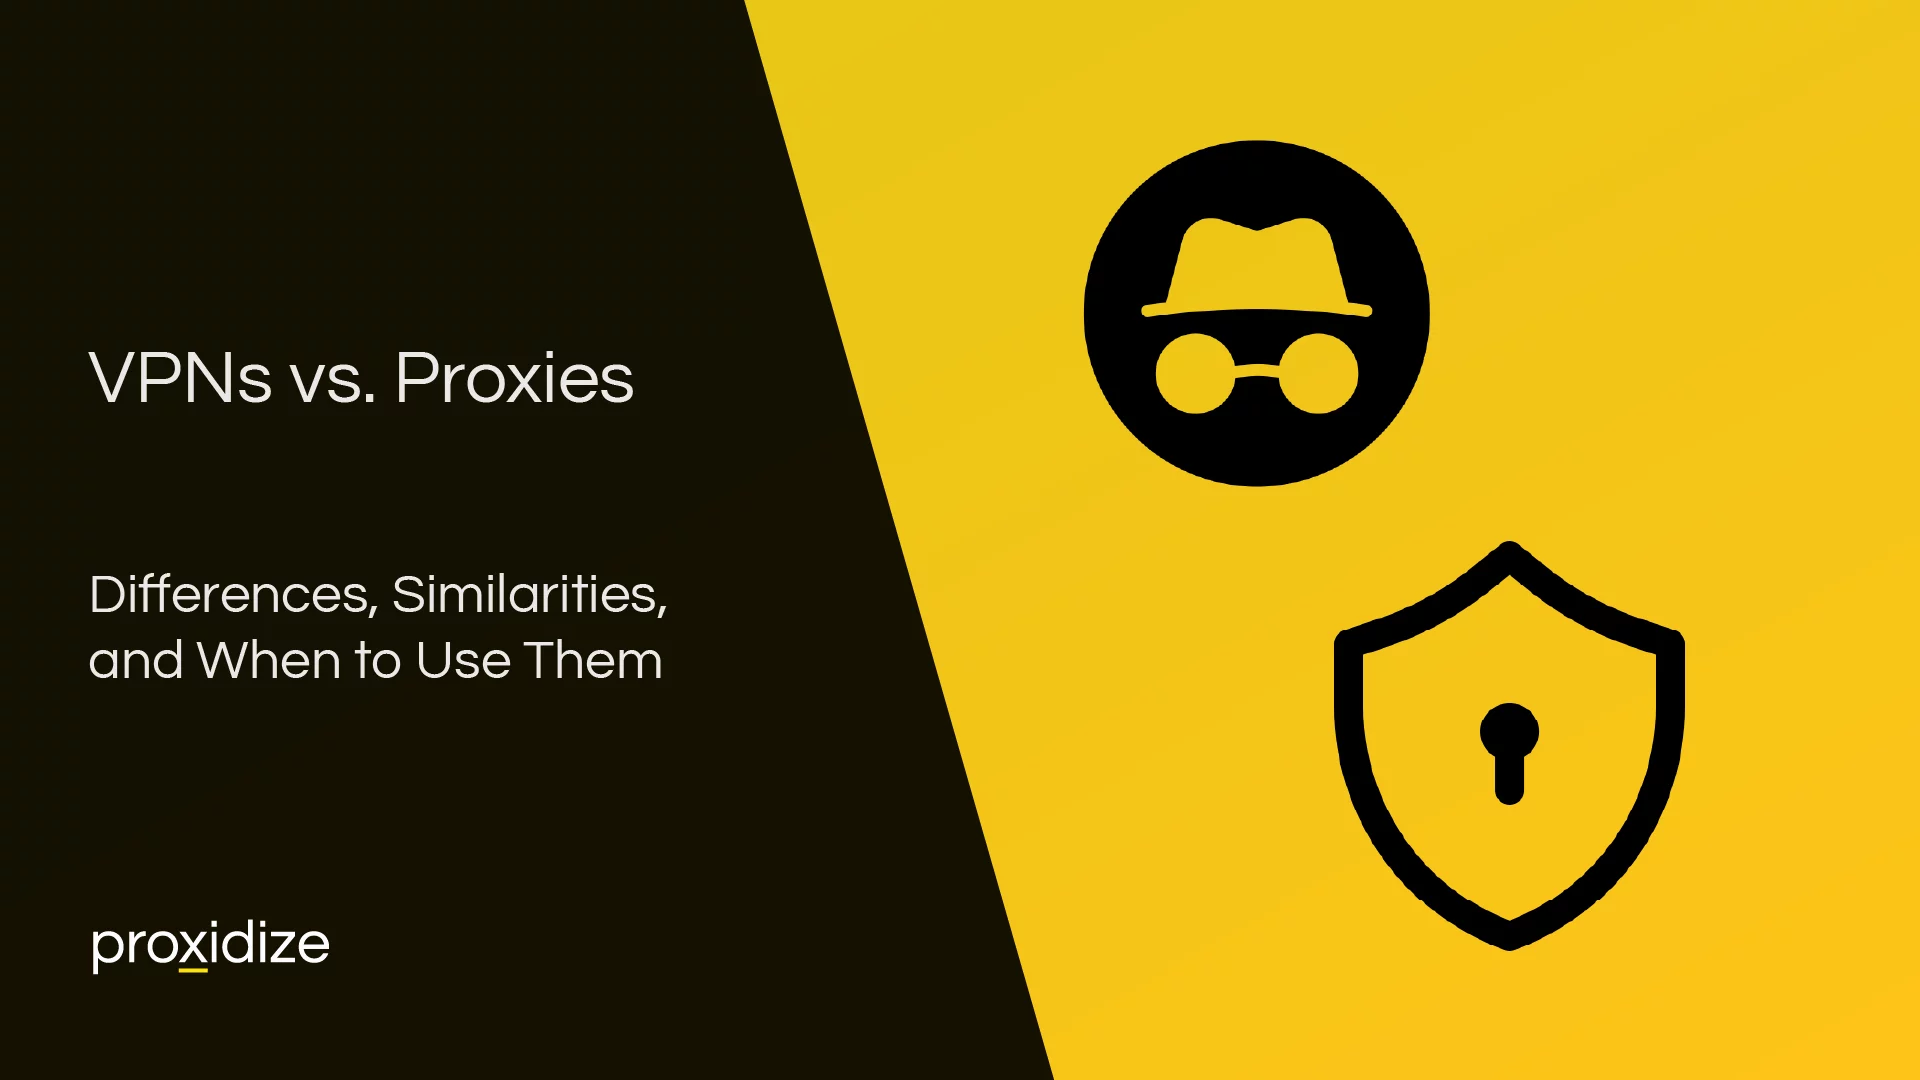 VPNs vs. Proxies: Differences, Similarities, and When to Use Them